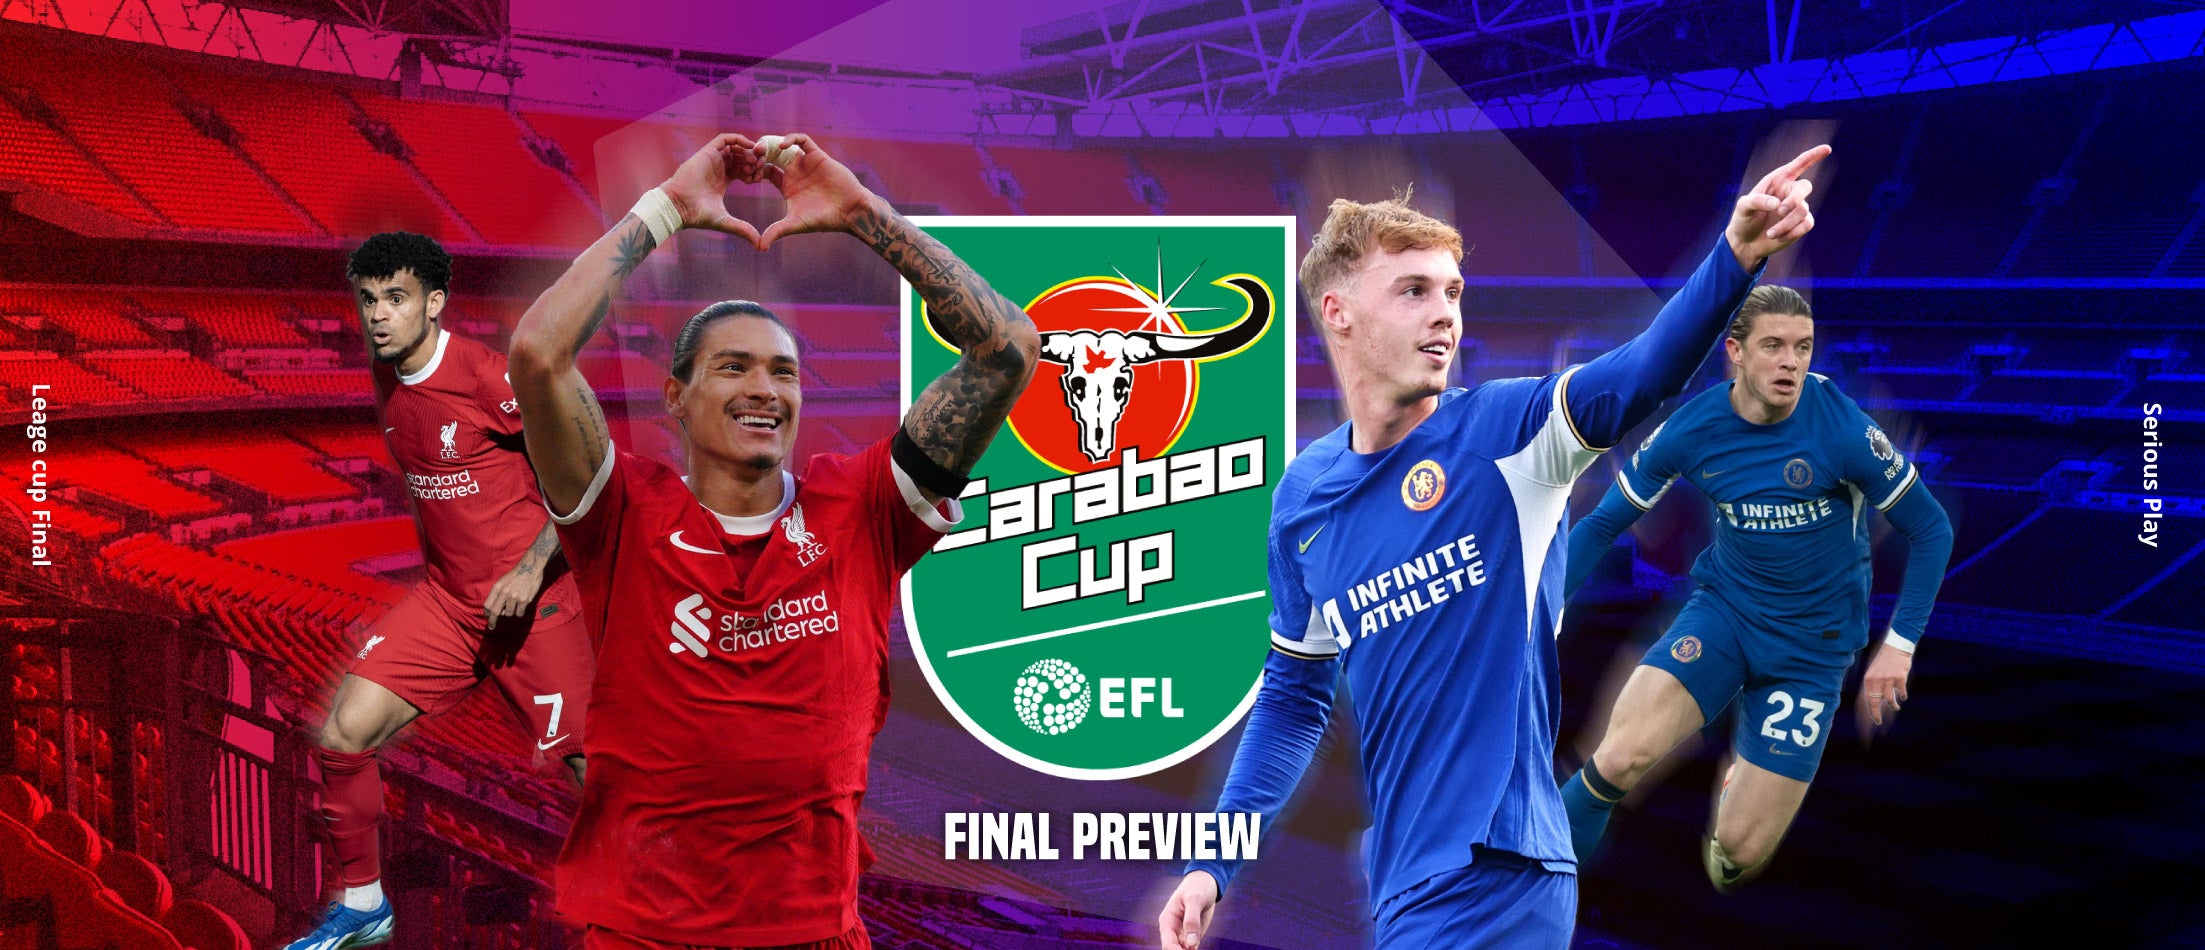 Carabao Cup Final - The Ultimate Guide: Kick-off Time, Date, TV channel & How to Watch